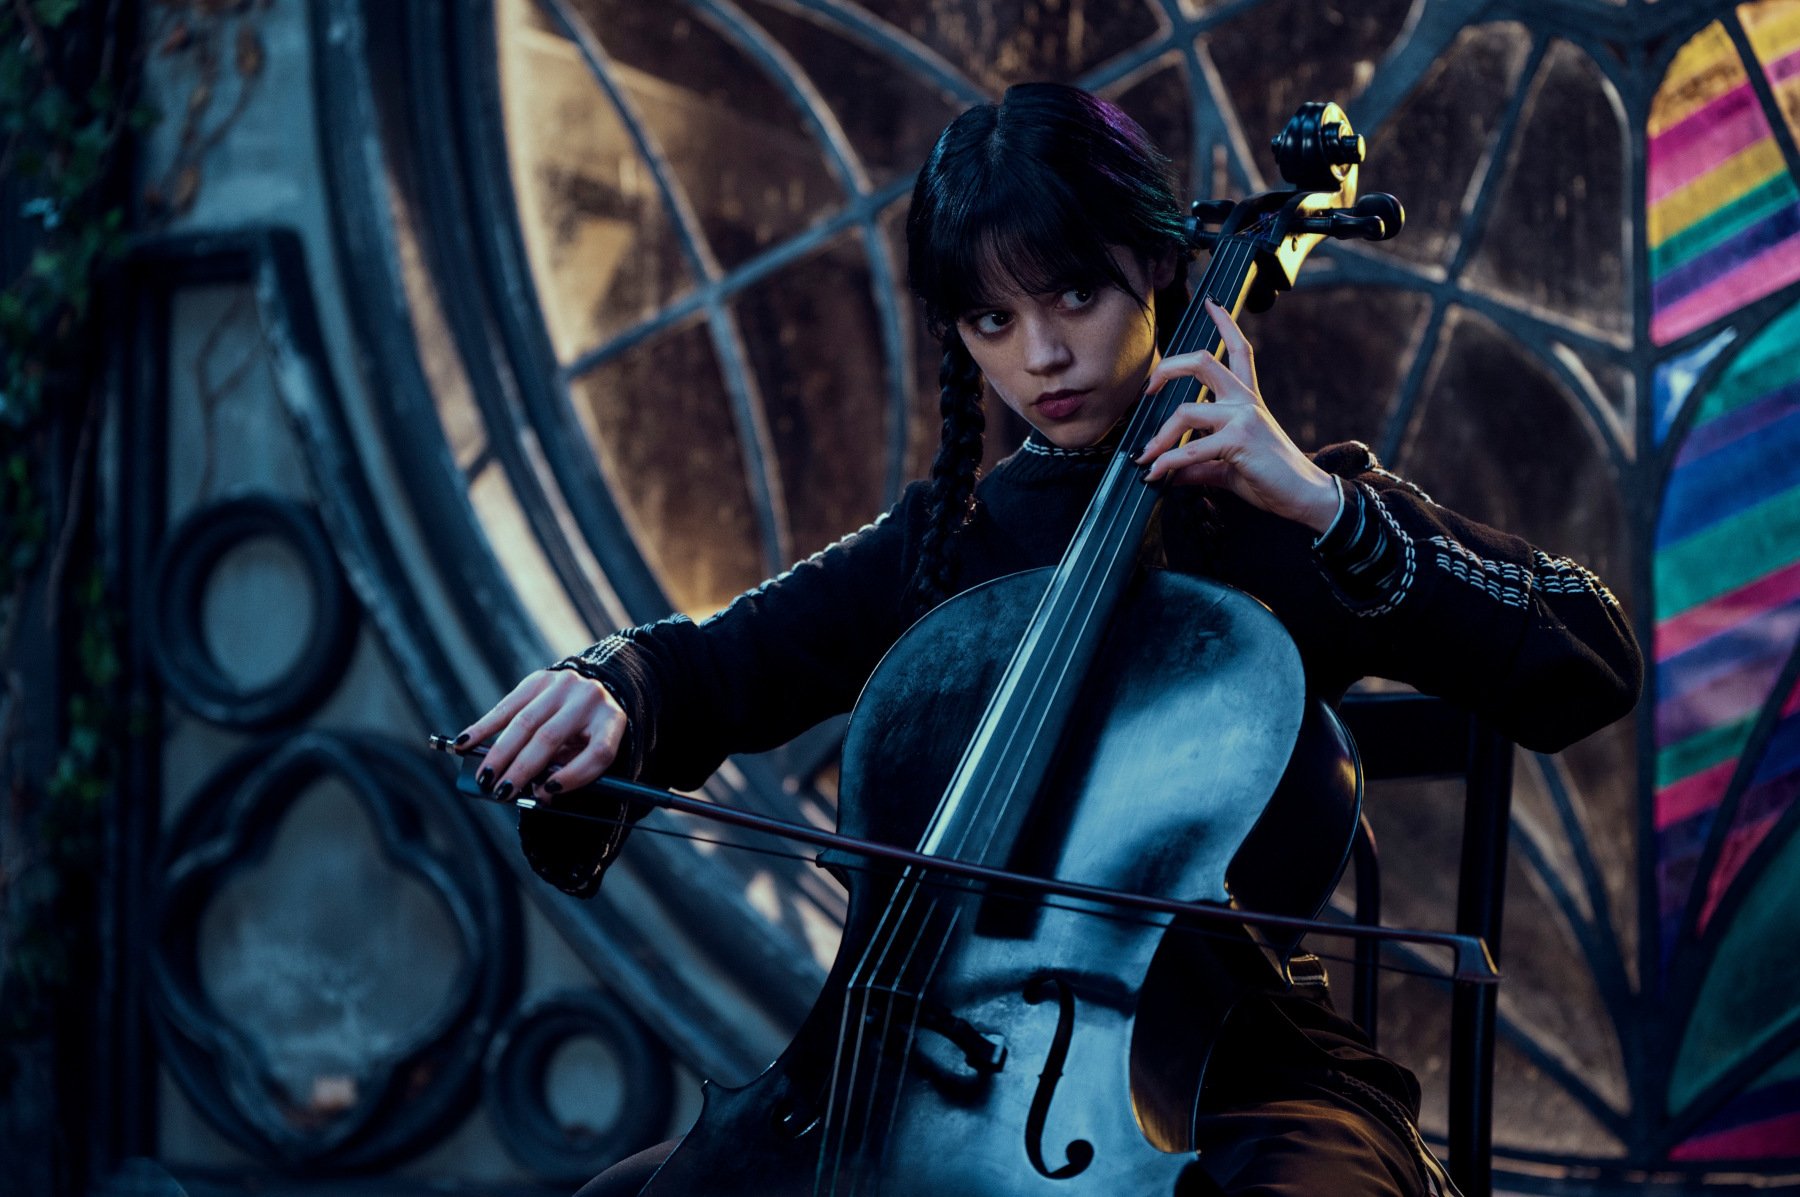 Jenna Ortega in Wednesday for our list of new shows and movies coming to Netflix this week.  Her black hair is braided and she plays the violin.